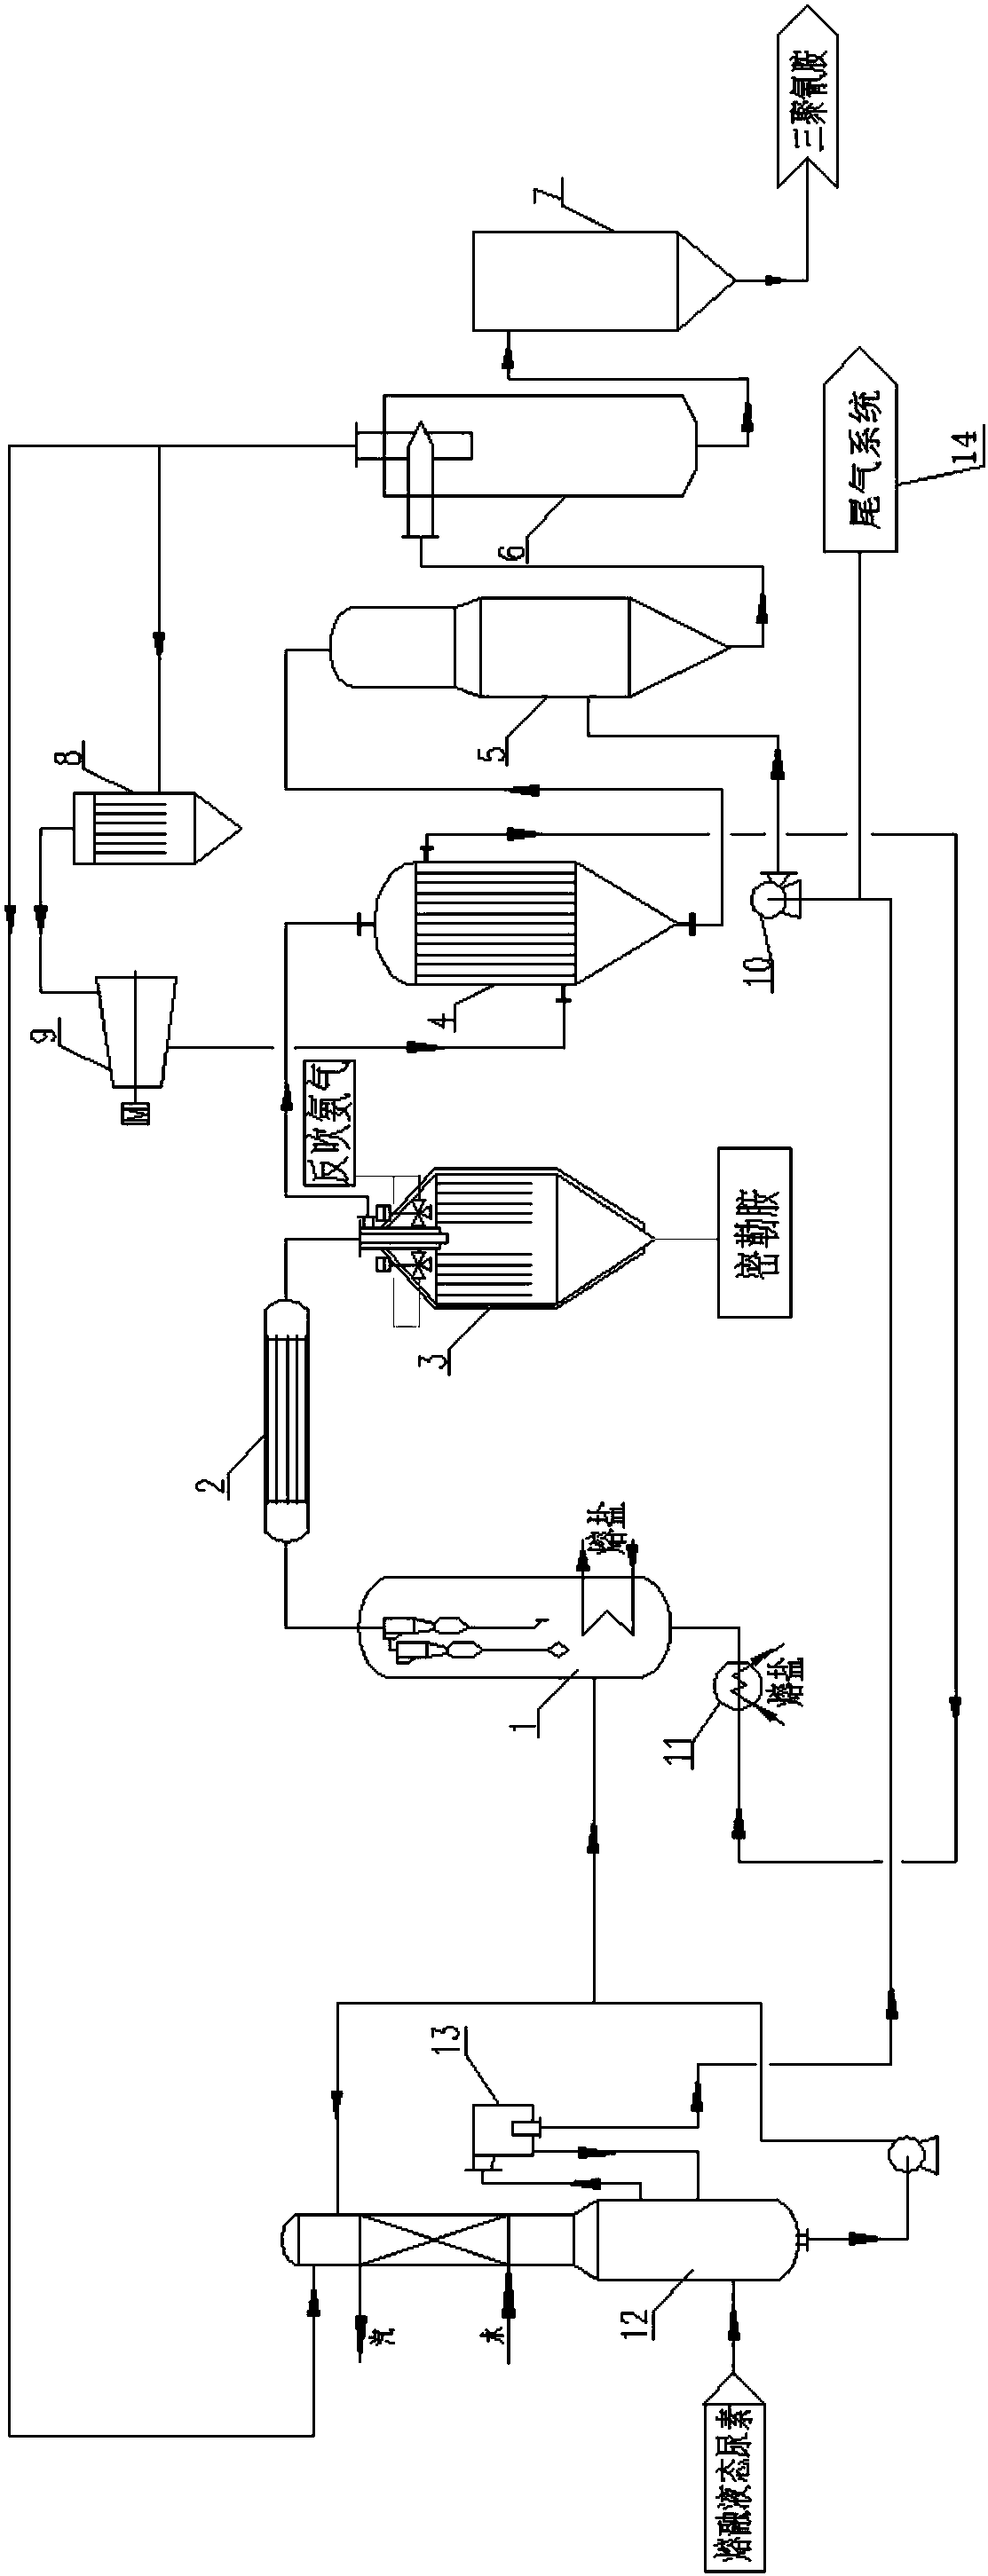 Melamine production device and production technology